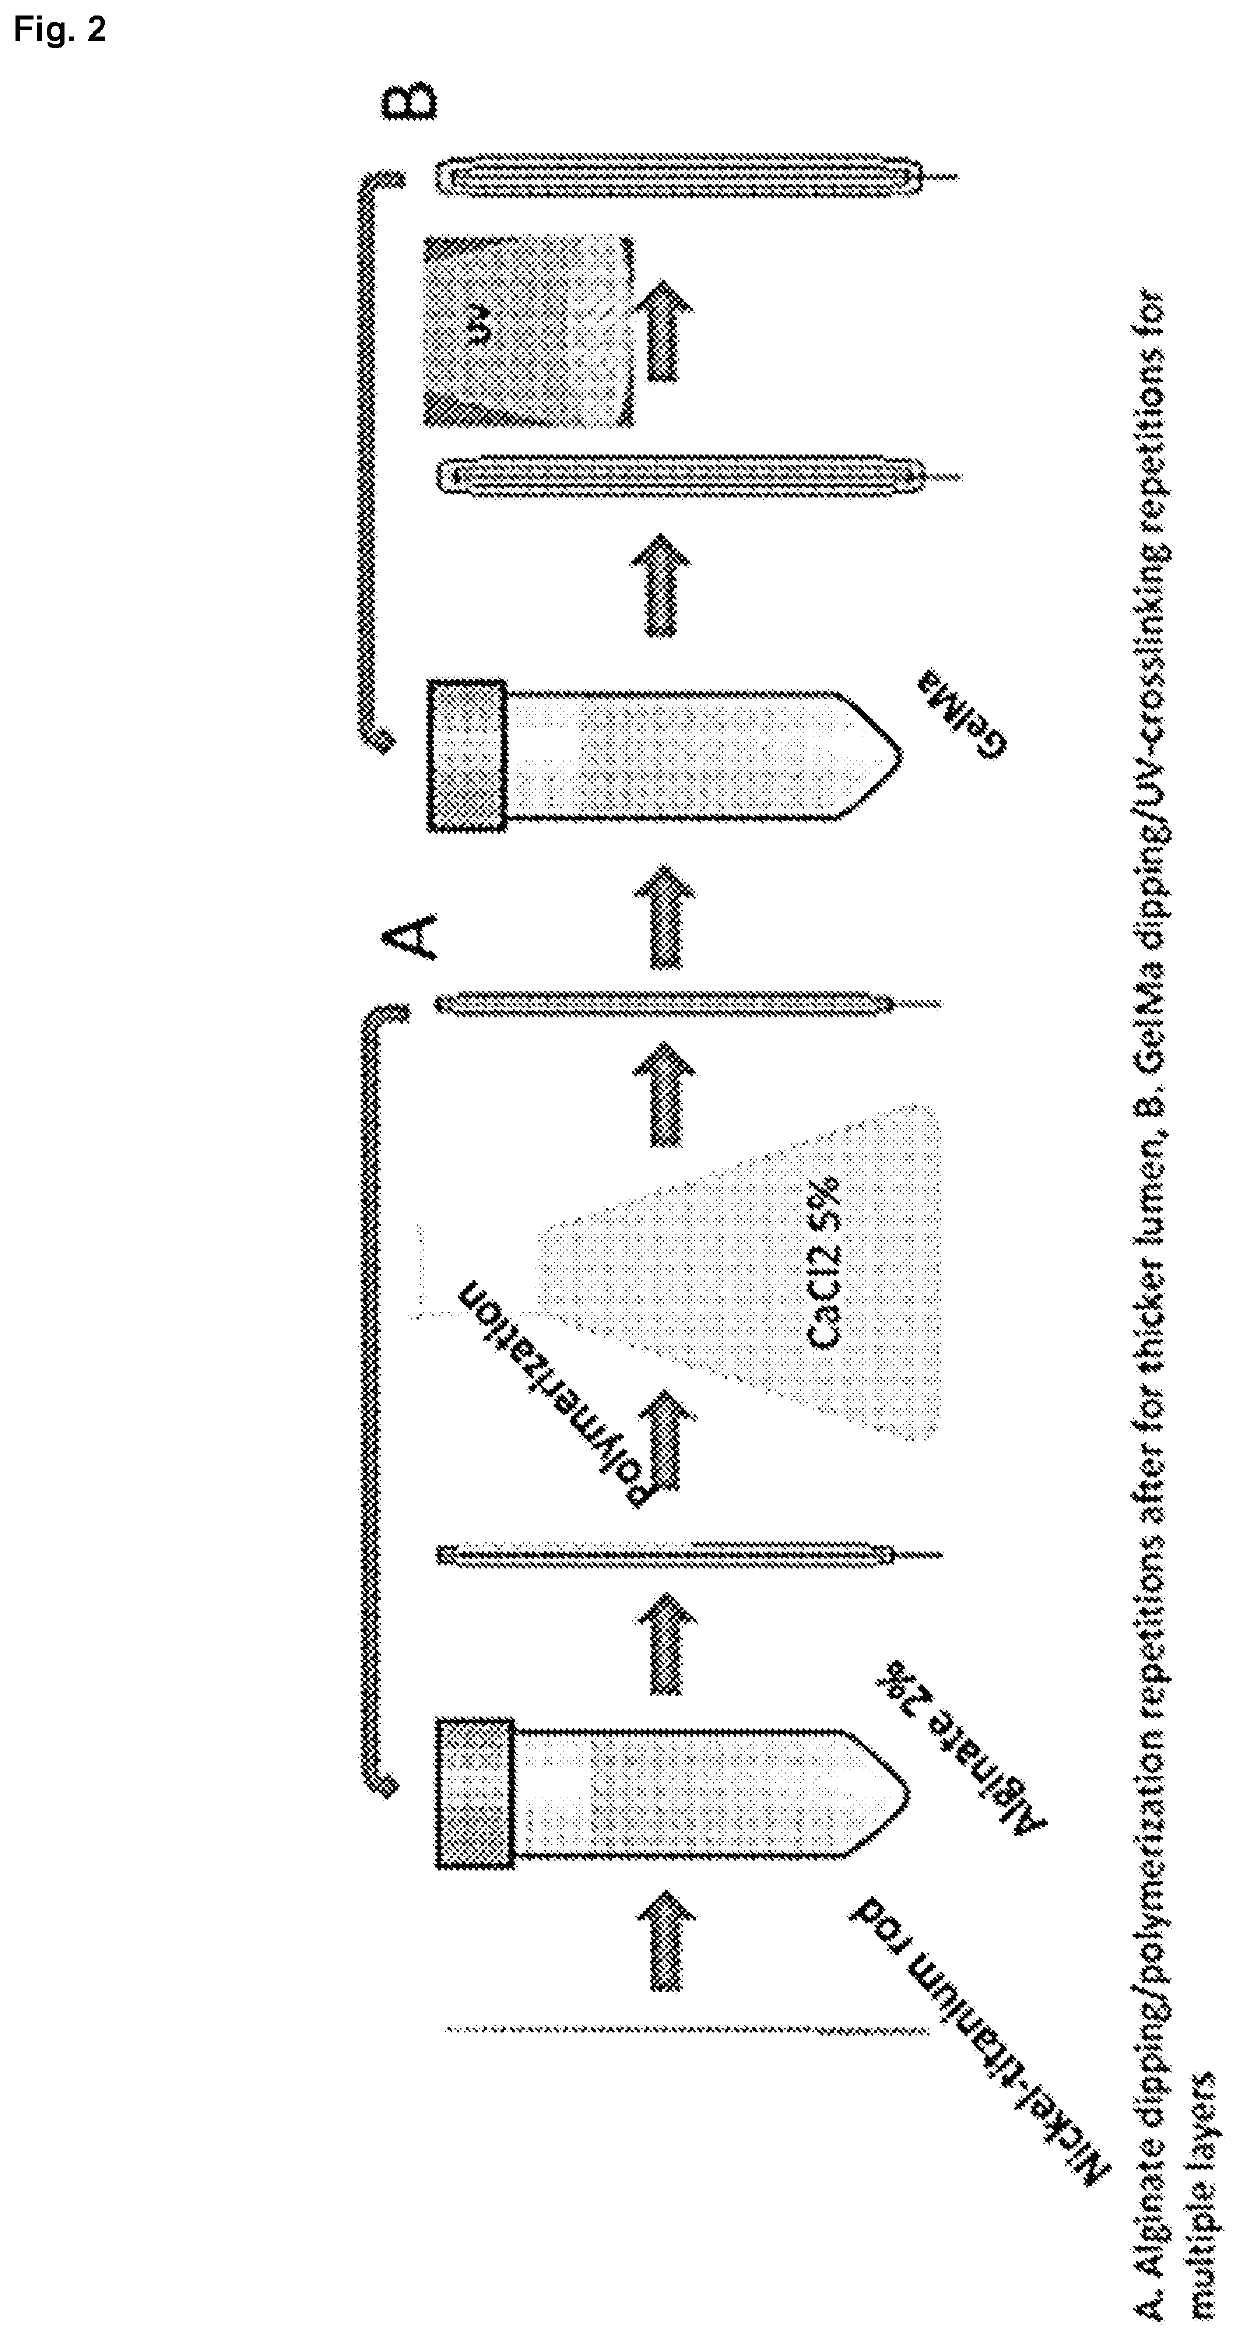 Automated fabrication of layer-by-layer tissue engineered complex tubes